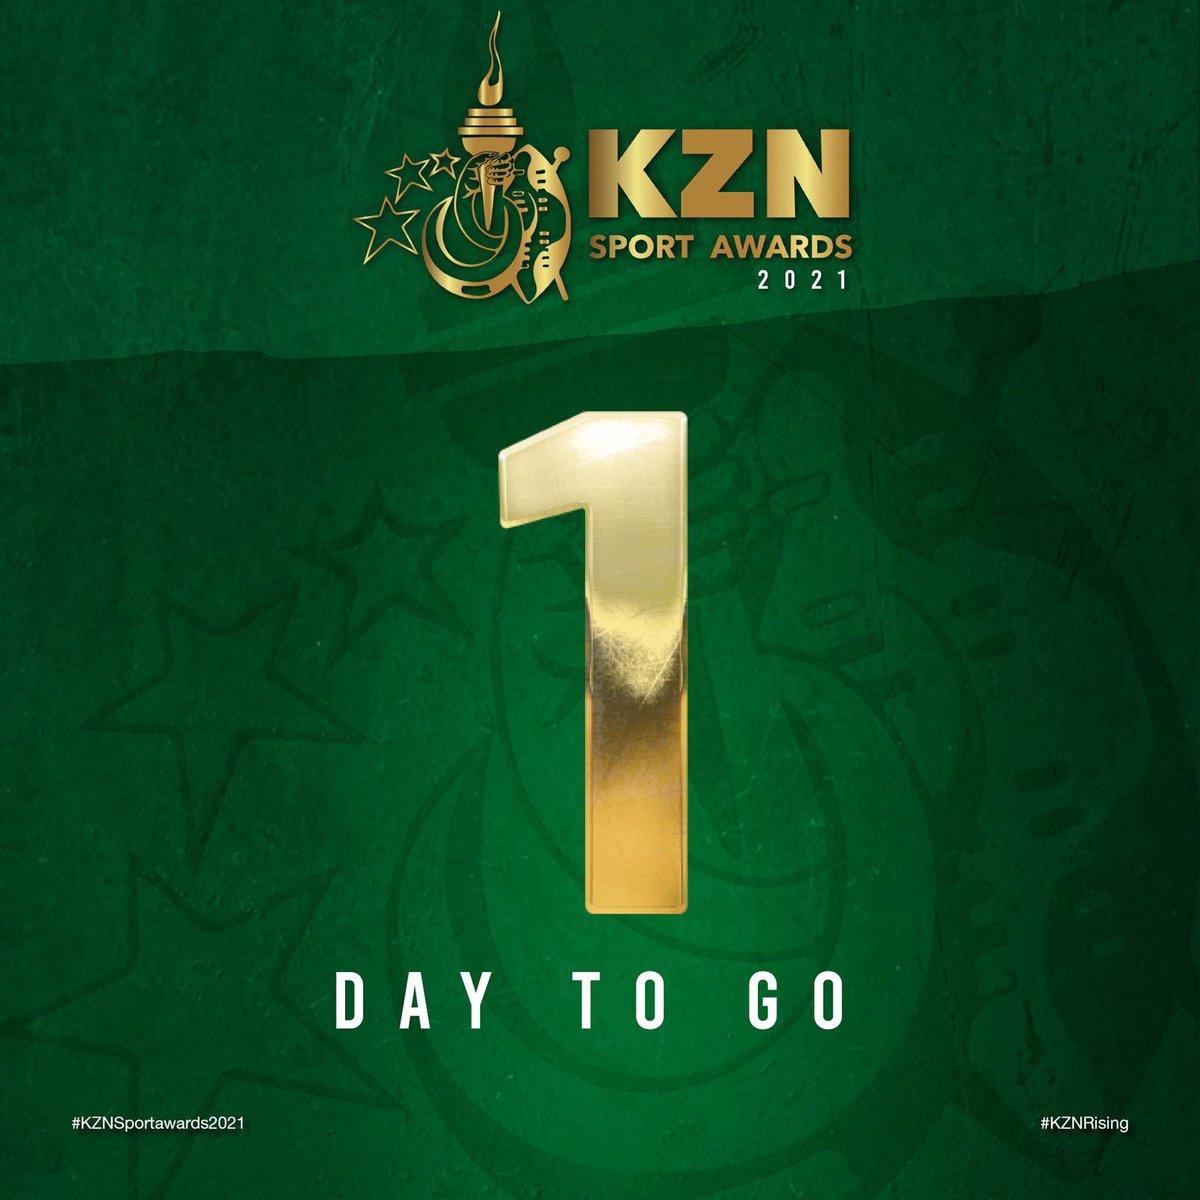 🚨 ONLY 1 MORE DAY TILL THE 2021 KZN SPORT AWARDS🚨🔥🔥🔥 ARE YOU READY??!! ARE YOU VOTING FOR YOUR FAVE??🔥🔥🔥🔥 Uthi ubani umpetha, who’s your champ? #OmpethaBethu #OurChampions #winningAndActiveProvince #kznsportaward2021